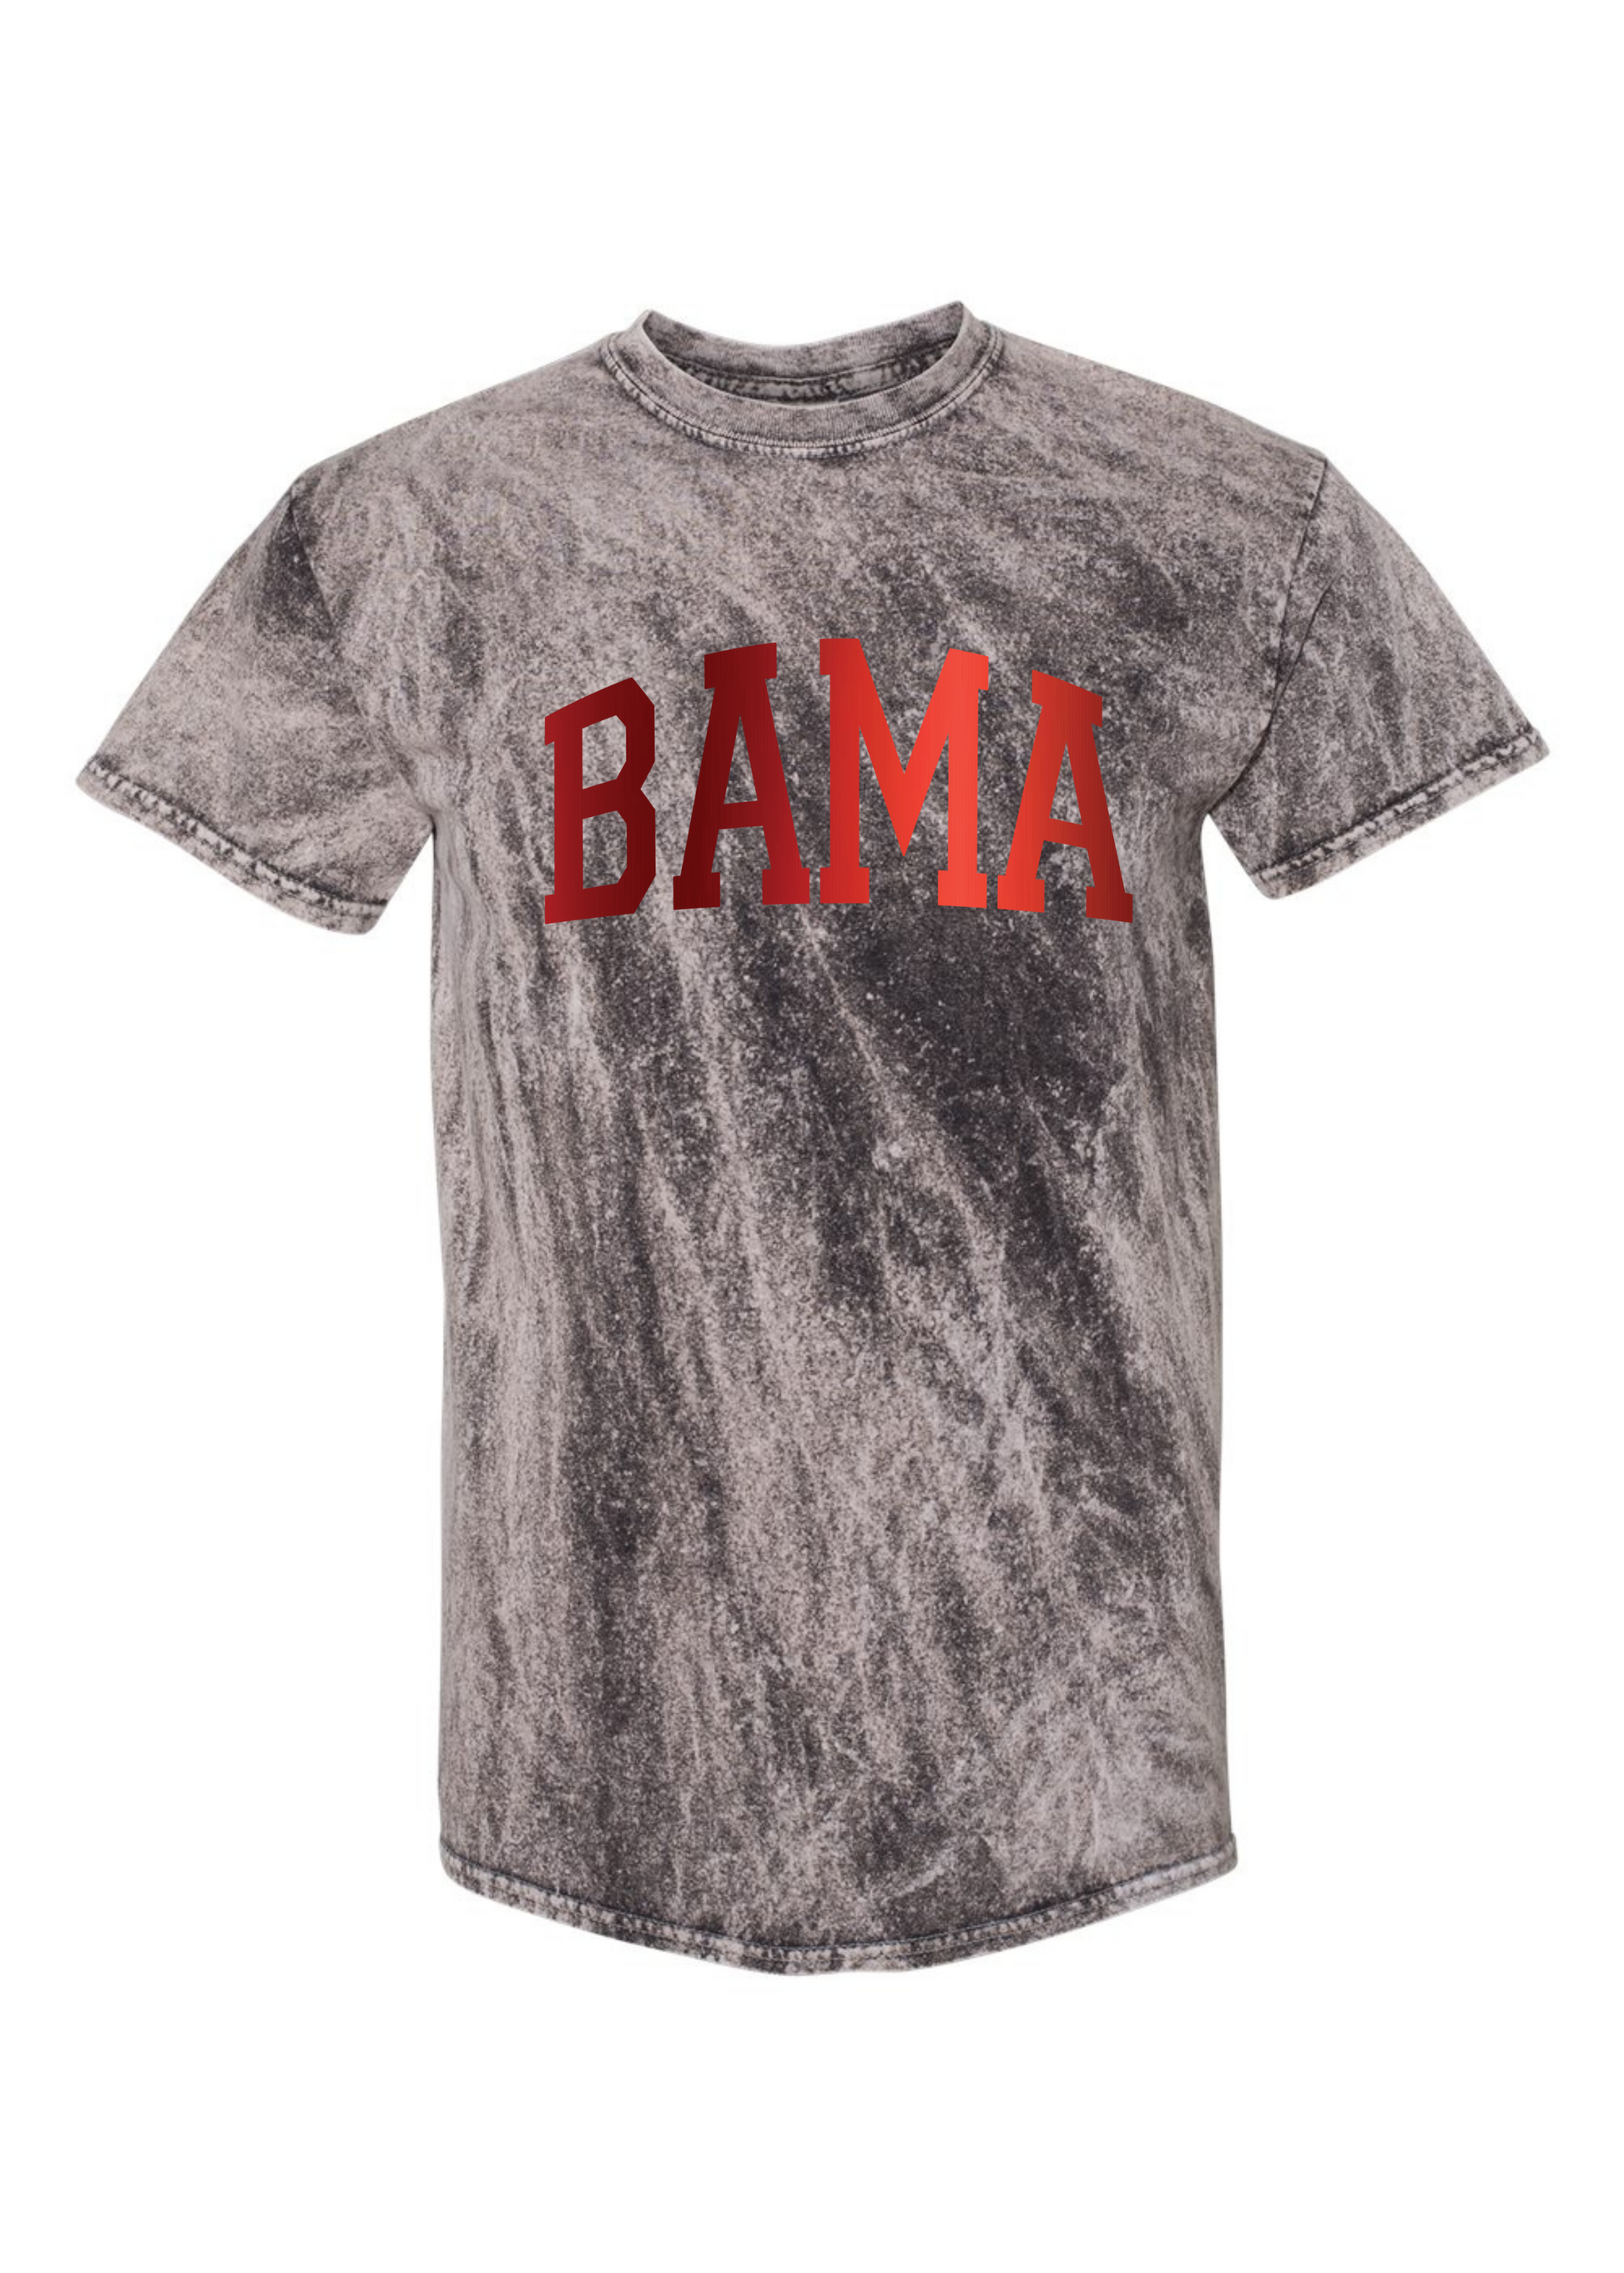 Bama Foil | Adult Mineral Wash Tee-Adult Tee-Sister Shirts-Sister Shirts, Cute & Custom Tees for Mama & Littles in Trussville, Alabama.